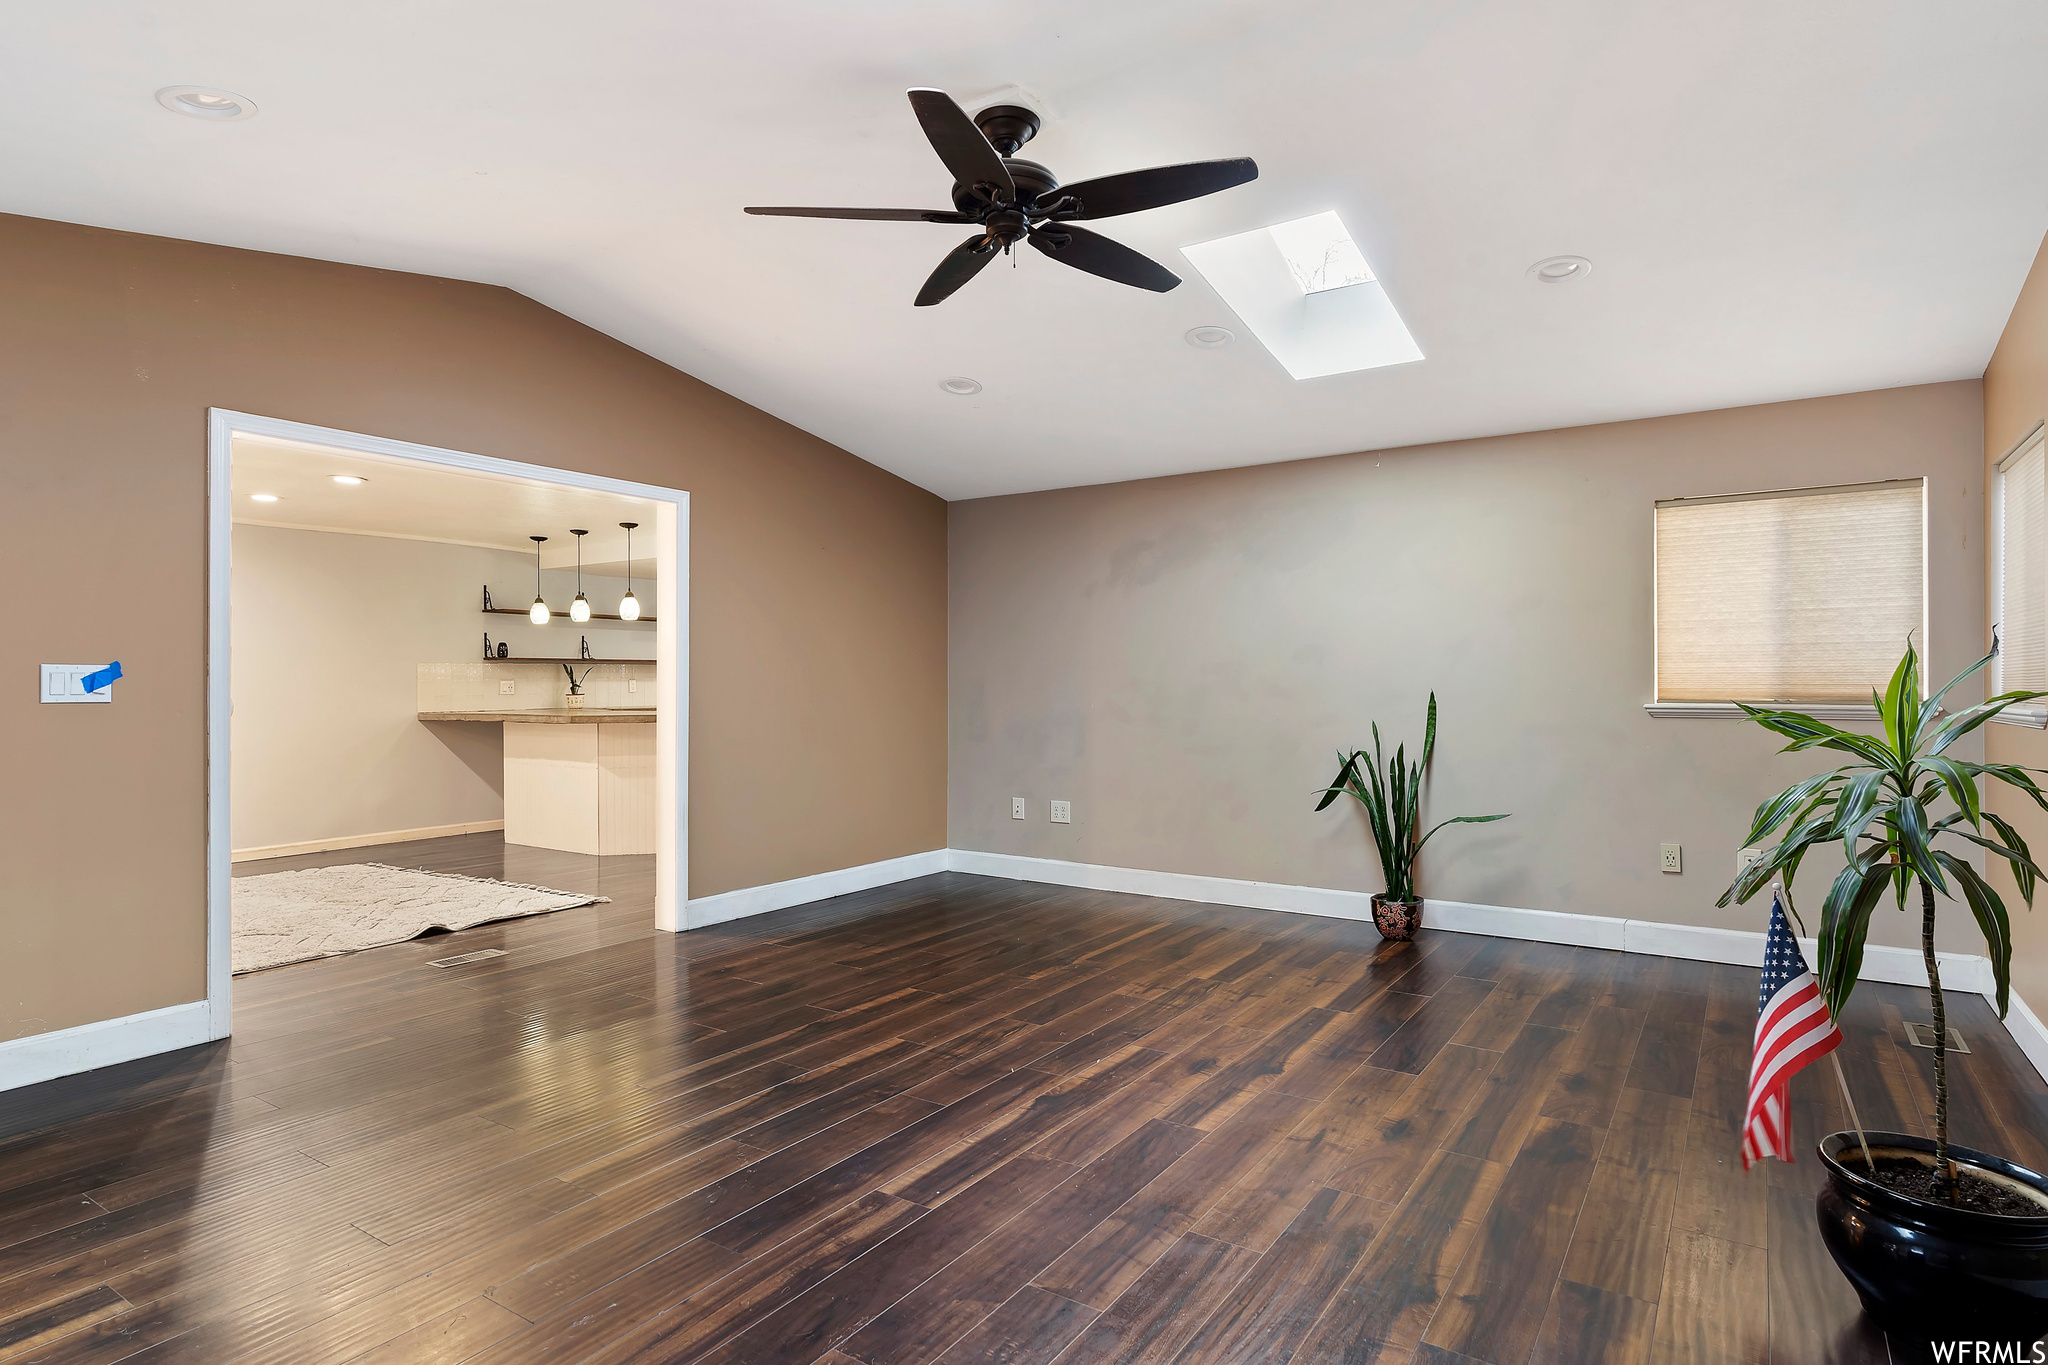 Spare room with dark hardwood / wood-style flooring, ceiling fan, and lofted ceiling with skylight